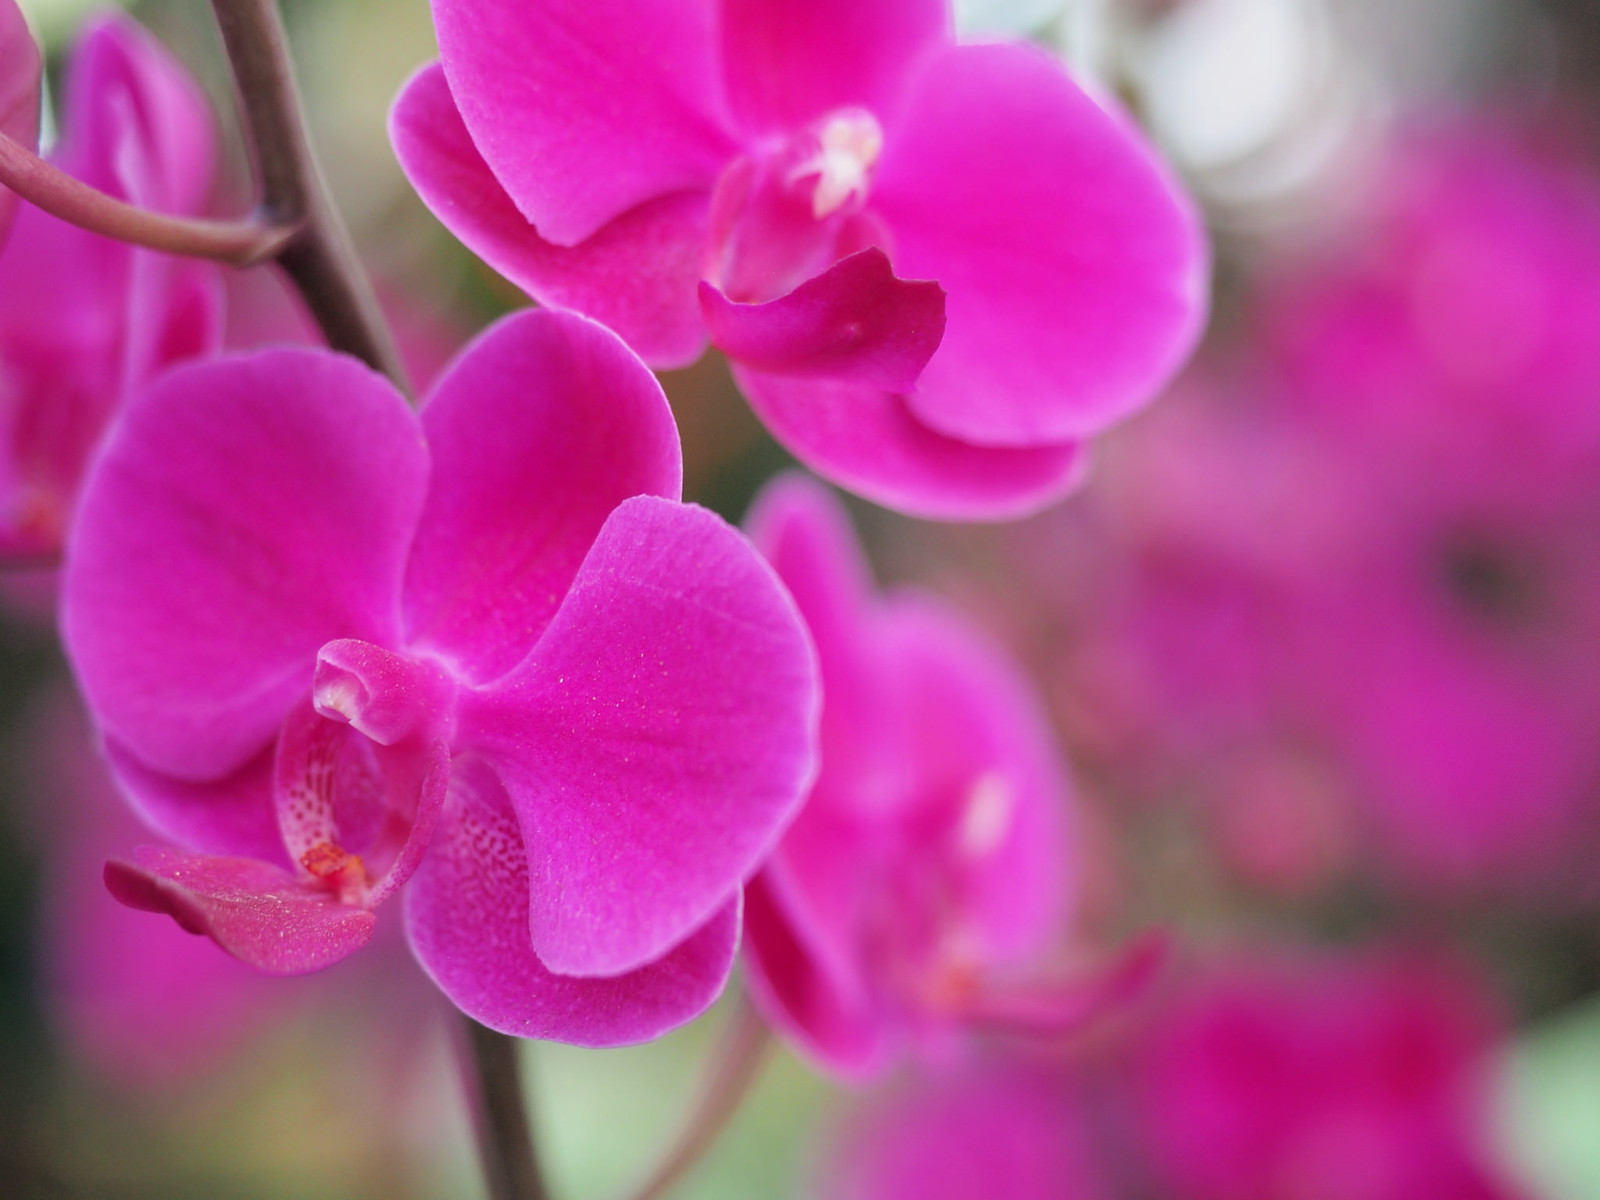 Moth orchid is the common name for the phalaenopsis orchid